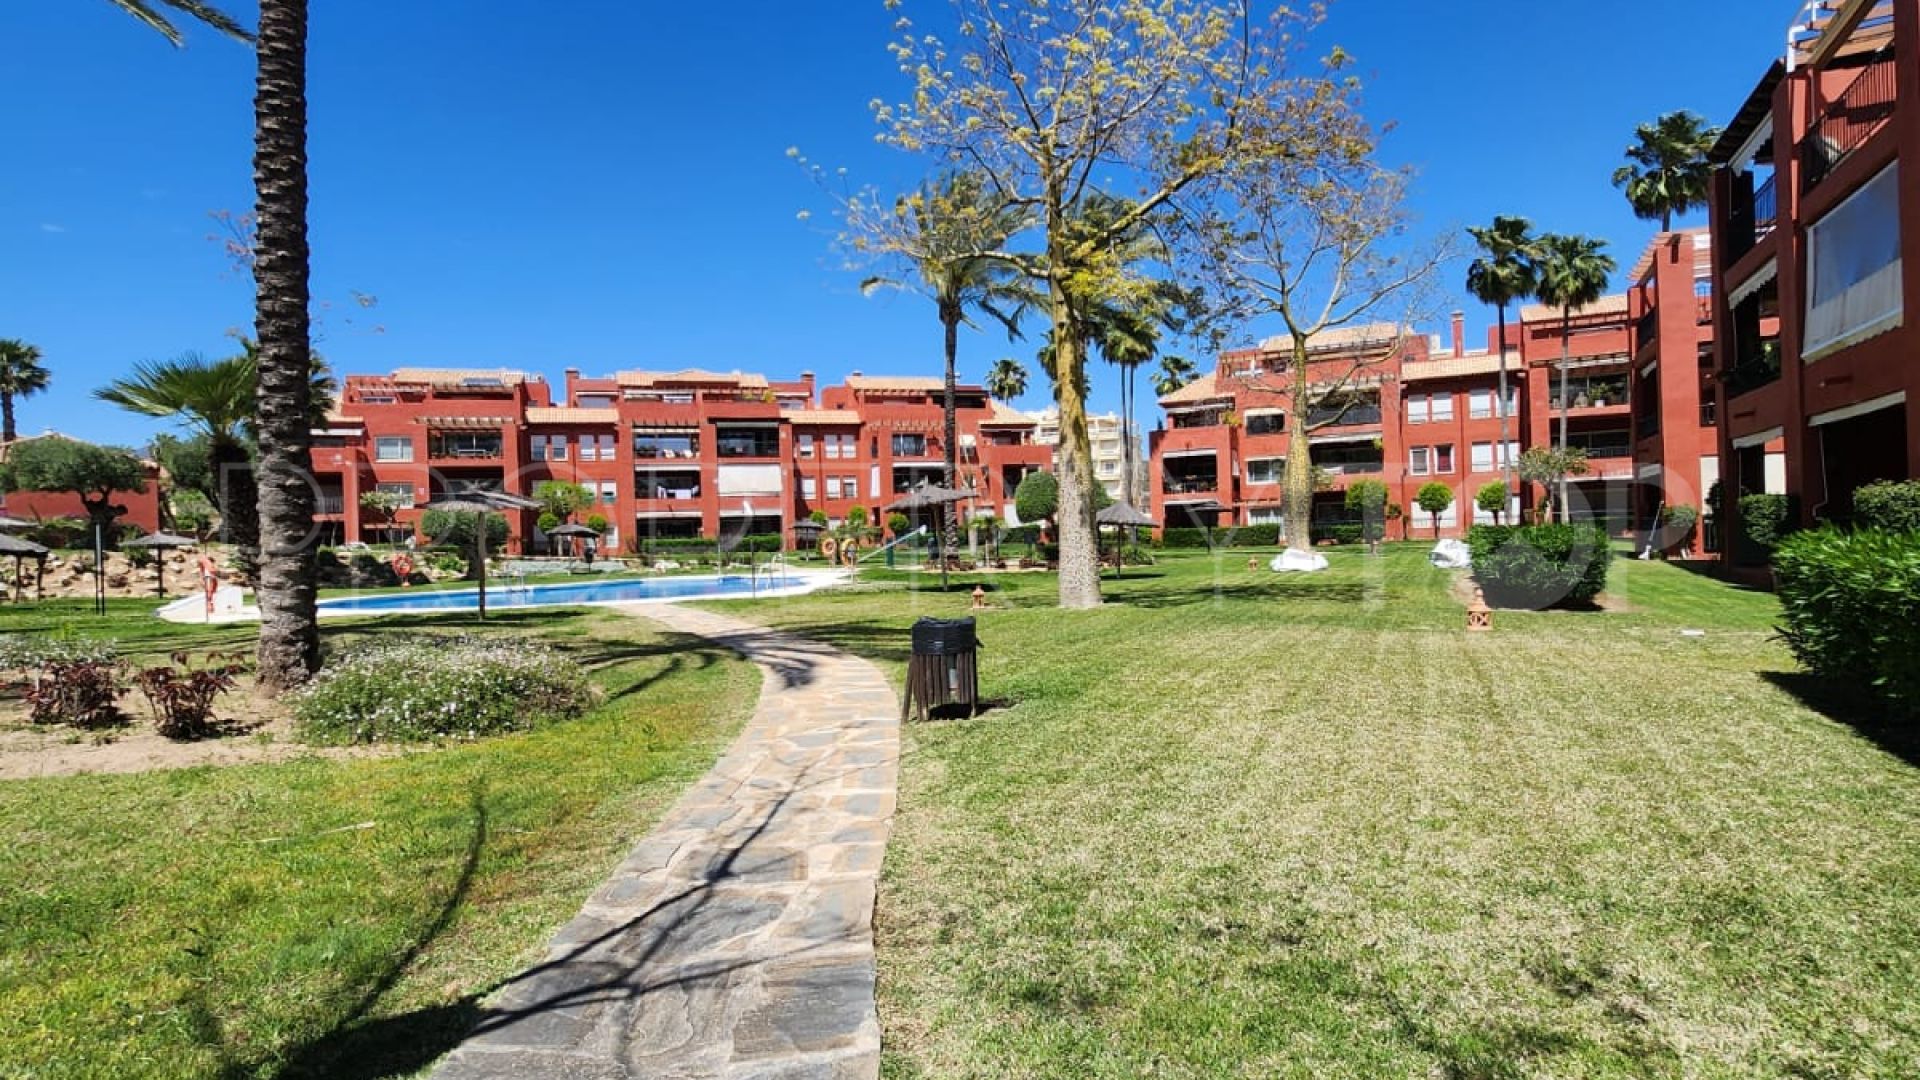 Apartment for sale in La Cala Hills with 2 bedrooms